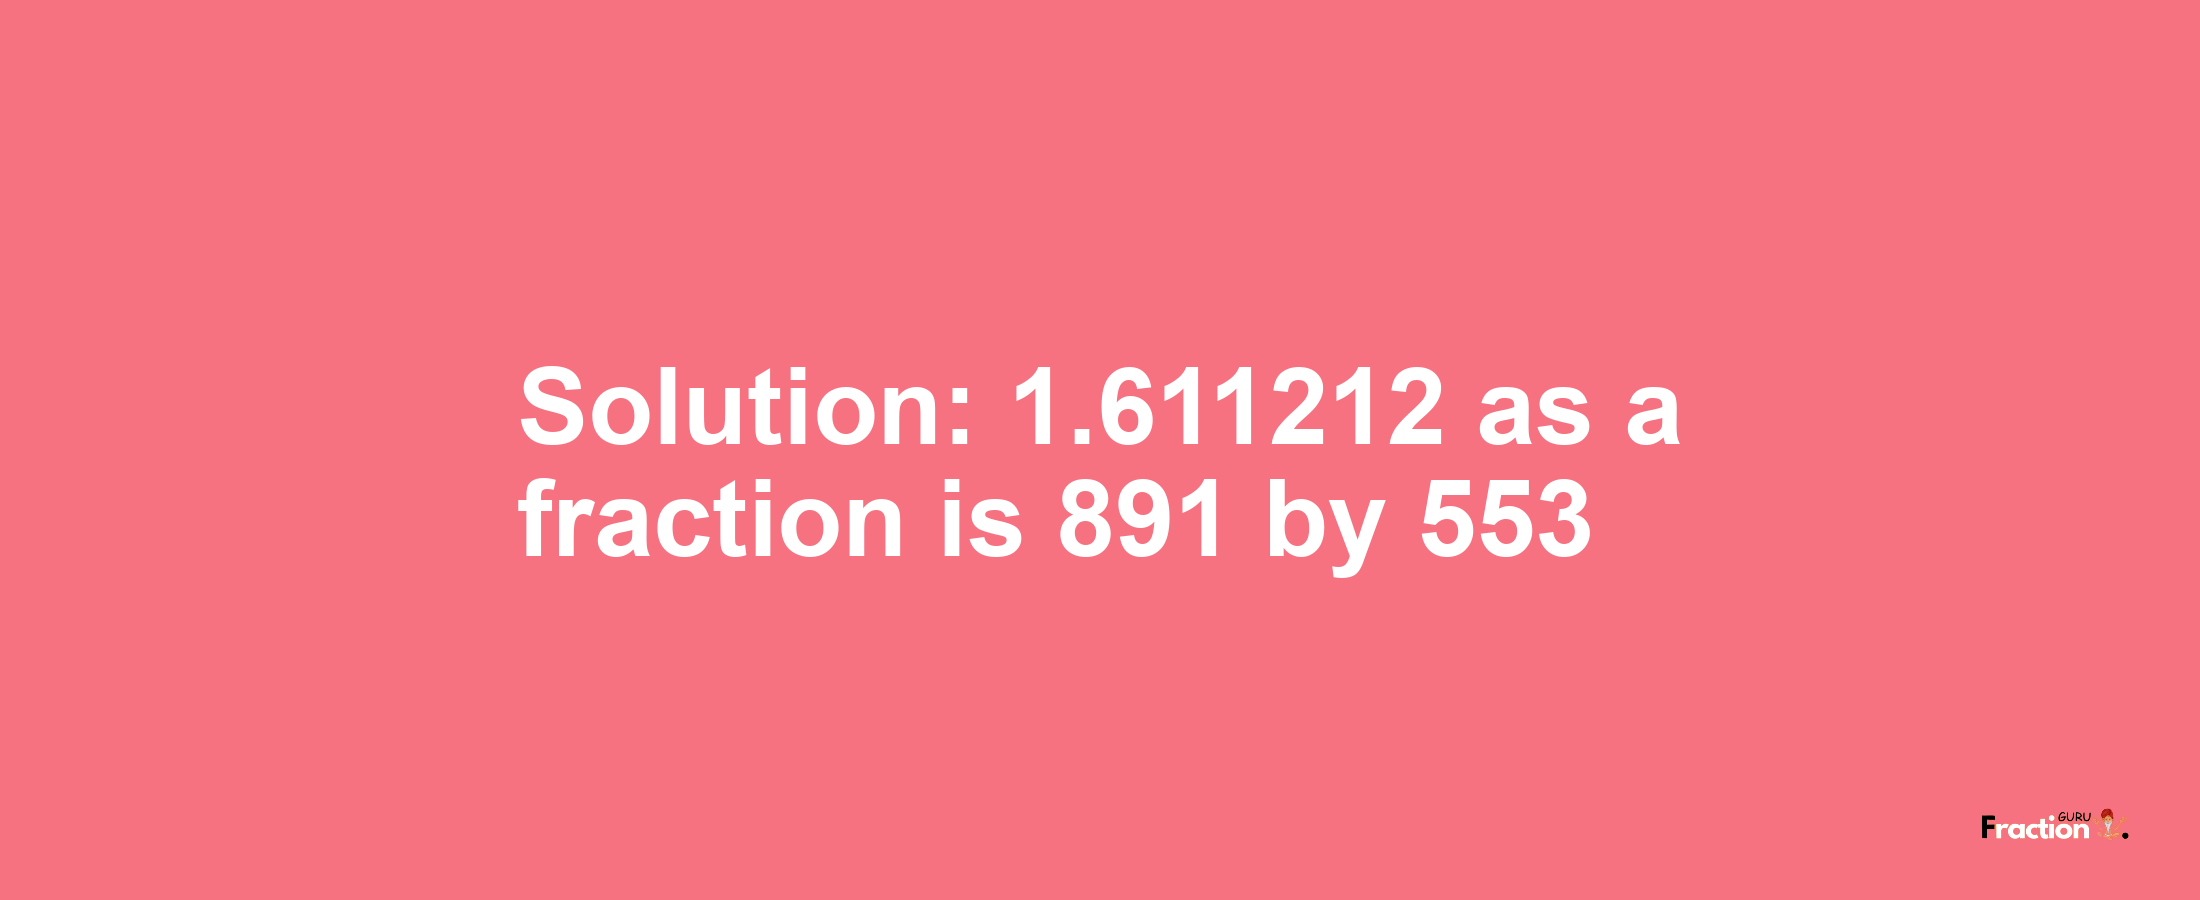 Solution:1.611212 as a fraction is 891/553